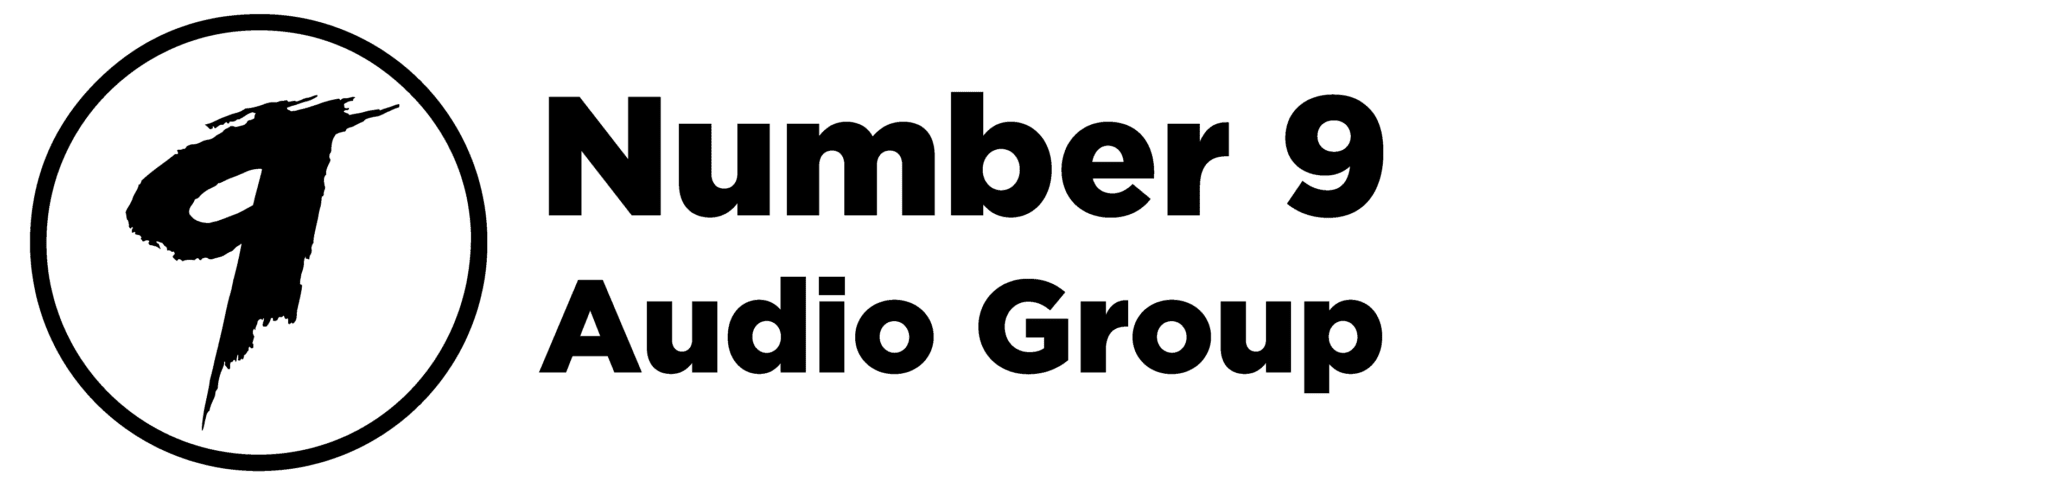 Number 9 Audio Group